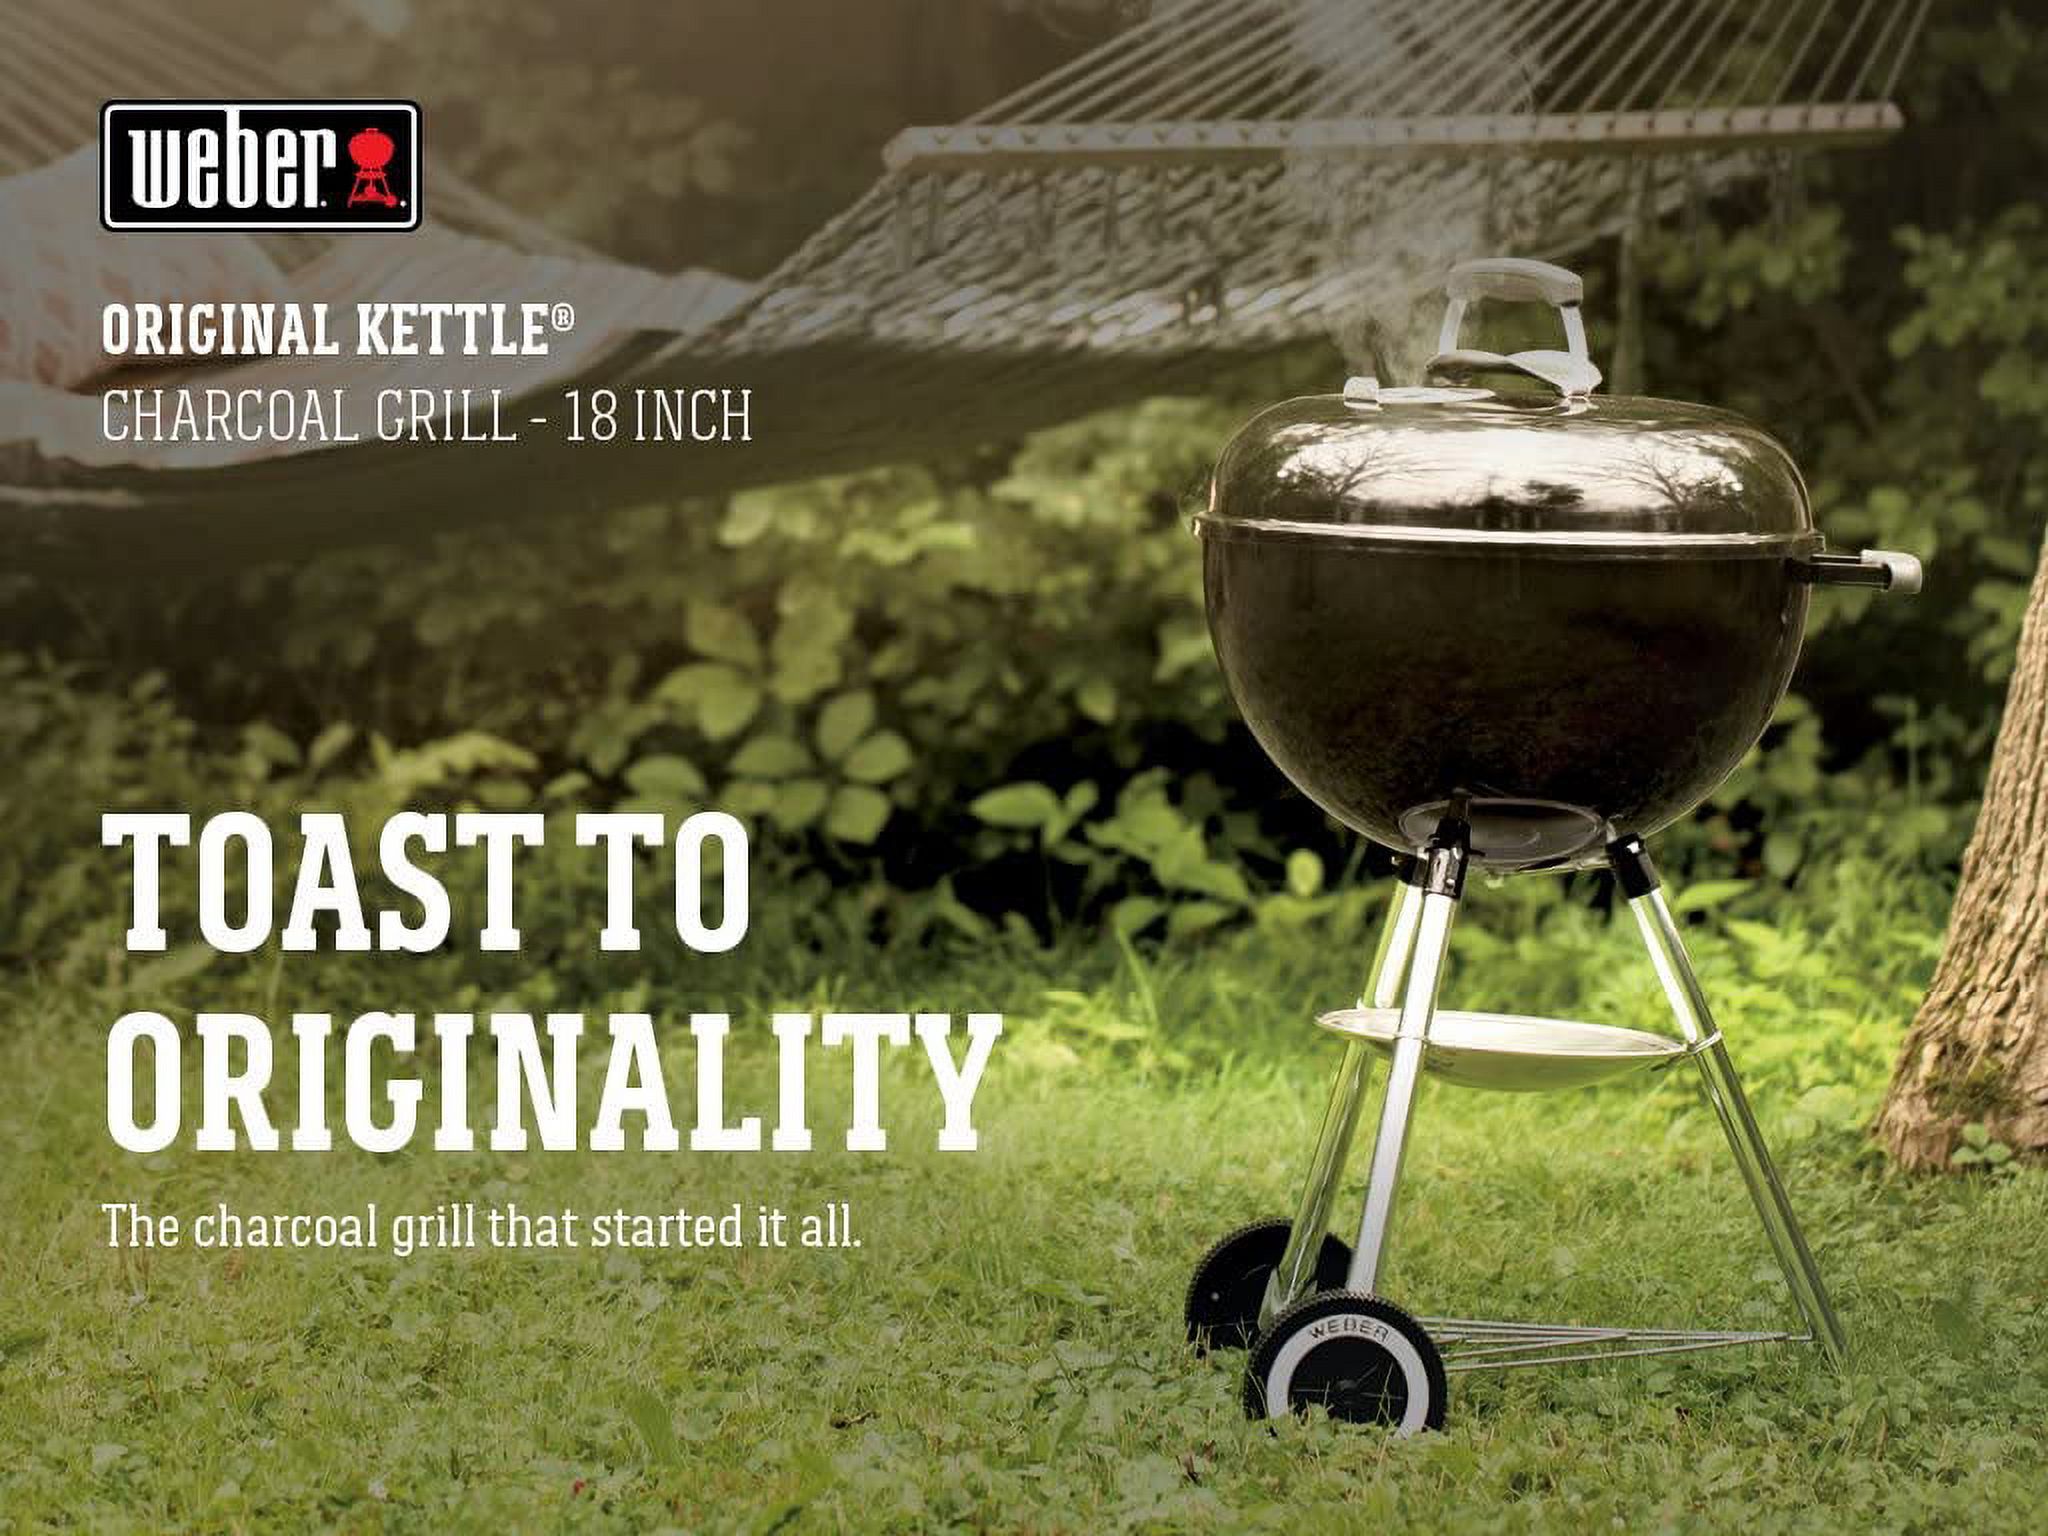 WEBER 18 In. Original Kettle Charcoal Grill In Black - image 2 of 3